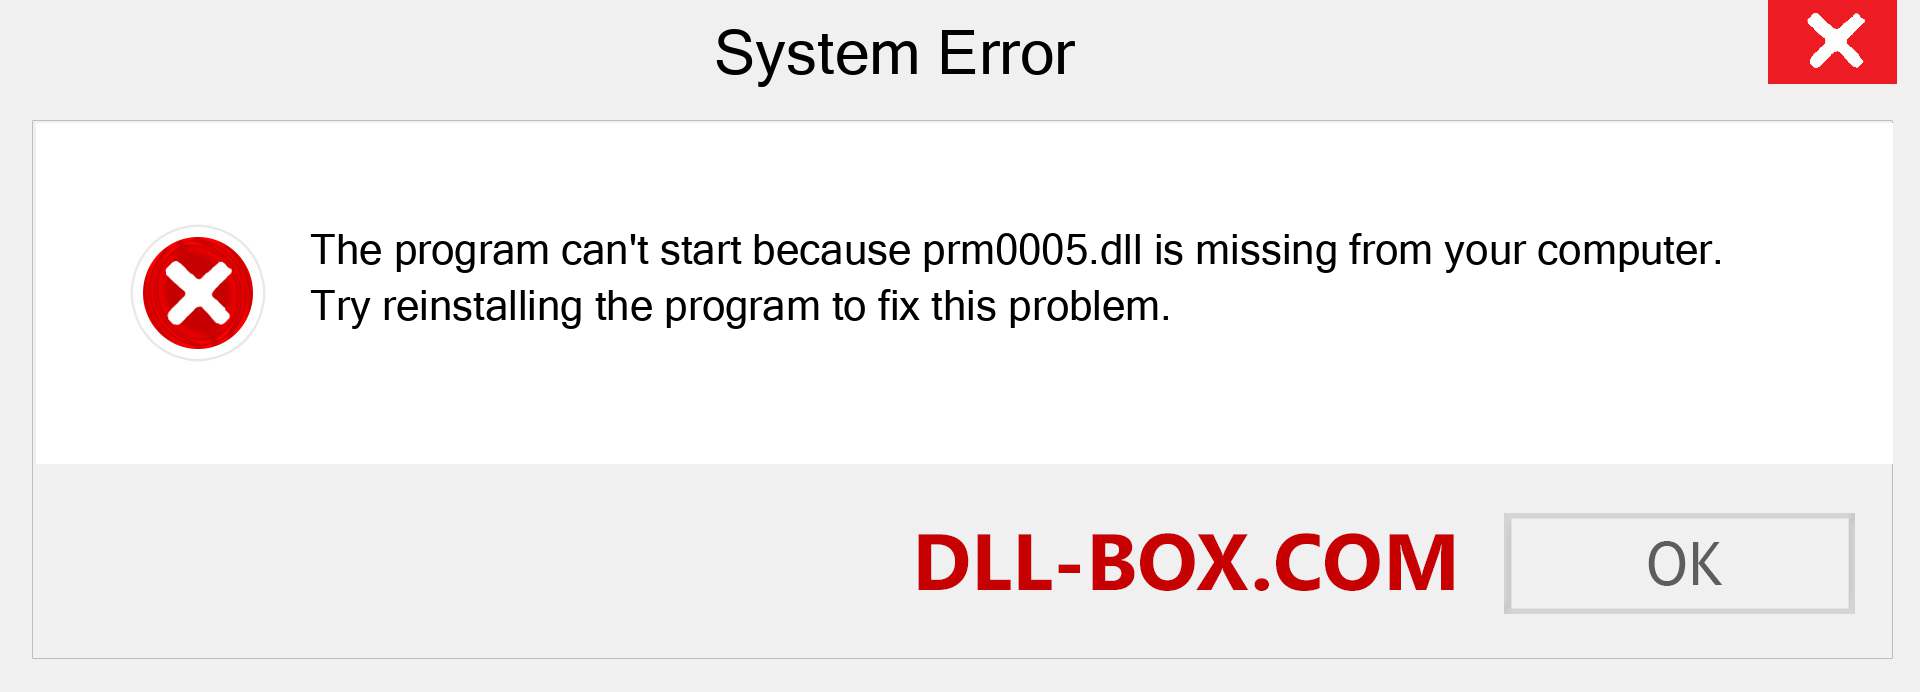  prm0005.dll file is missing?. Download for Windows 7, 8, 10 - Fix  prm0005 dll Missing Error on Windows, photos, images